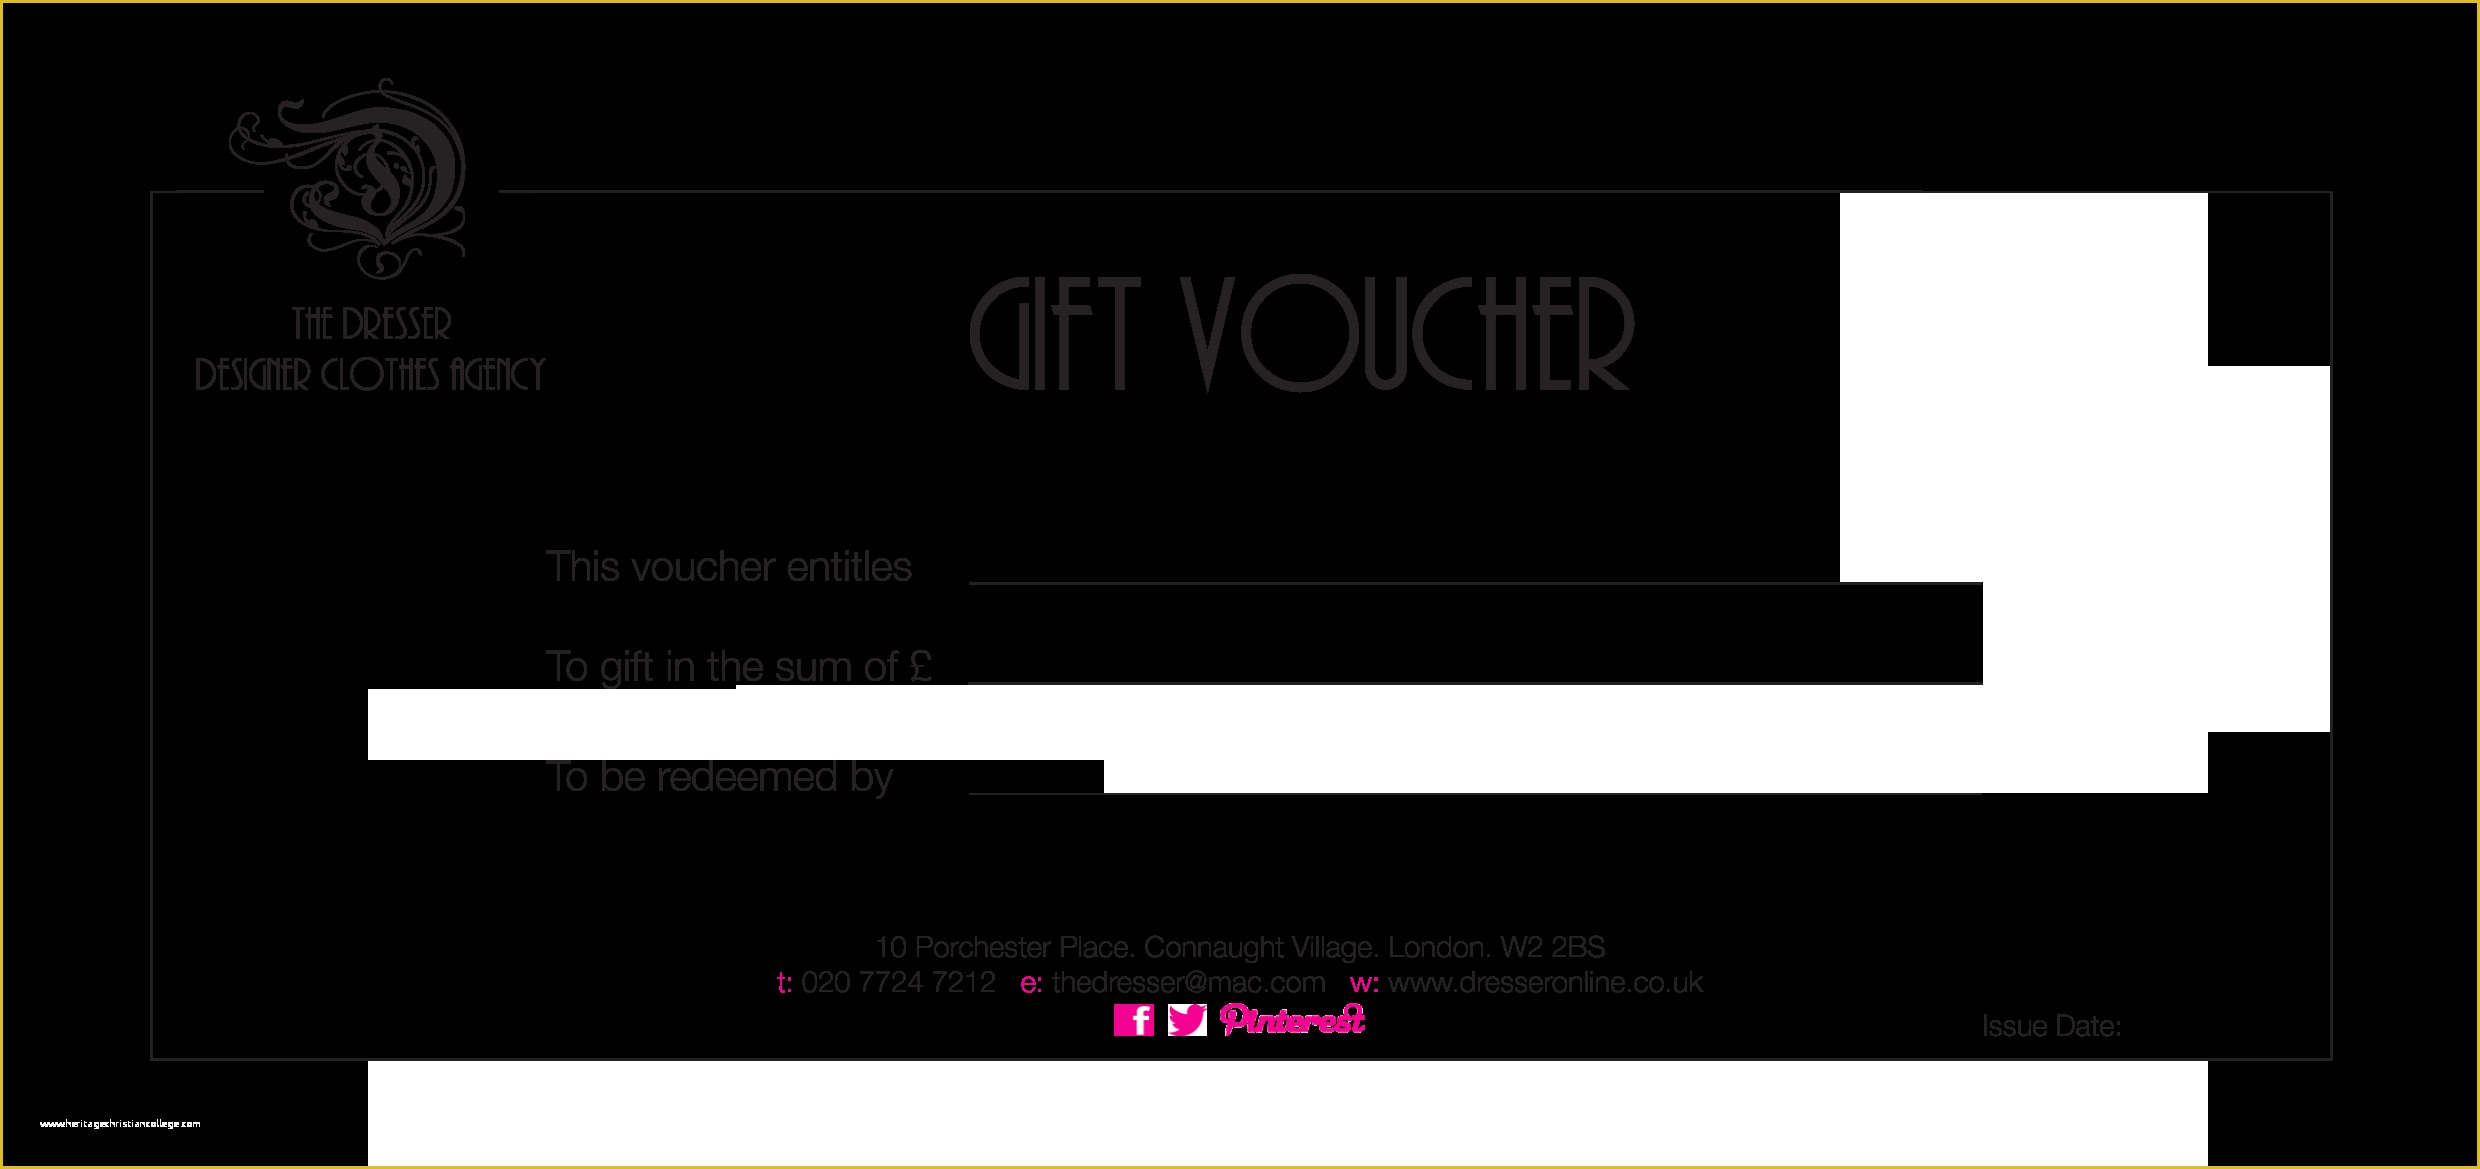 Free Download Gift Certificate Template Word Of Gift Voucher Template Word Free Download